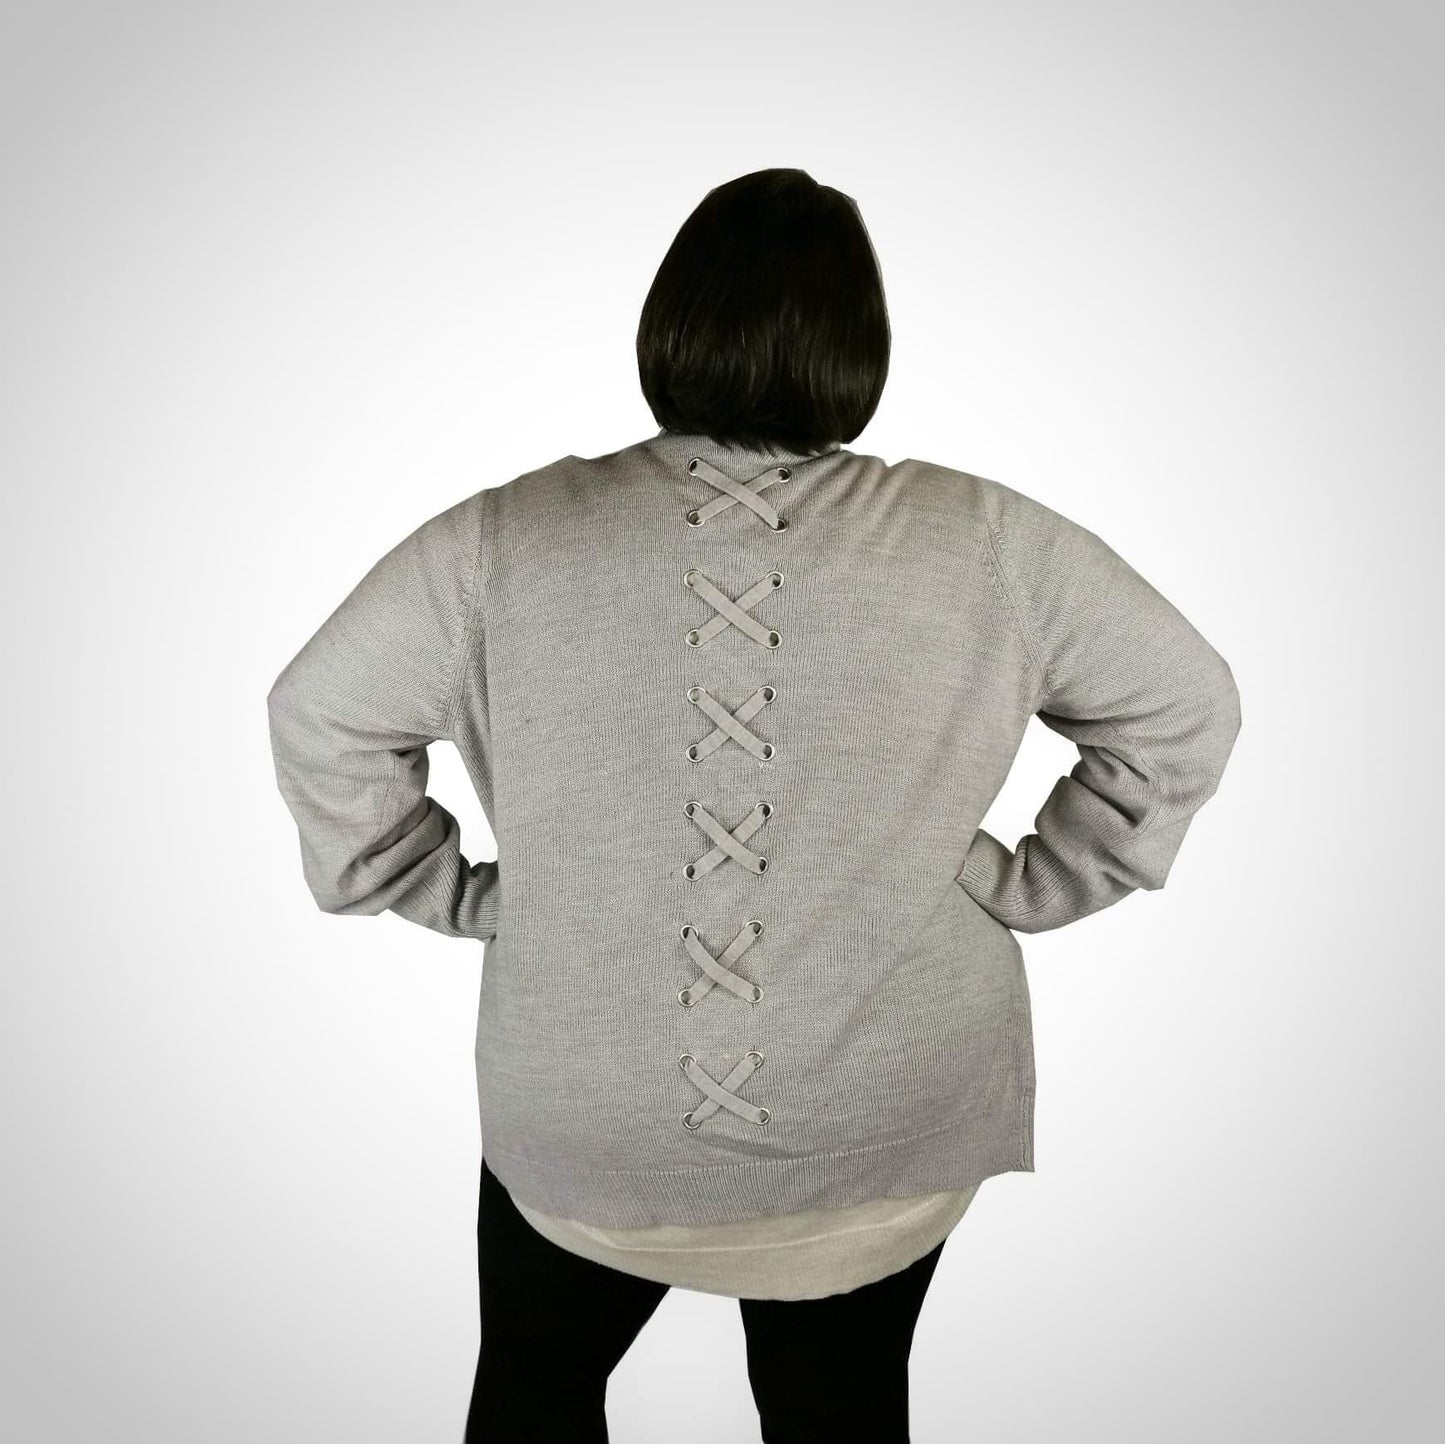 Gray knit jacket with crossed back